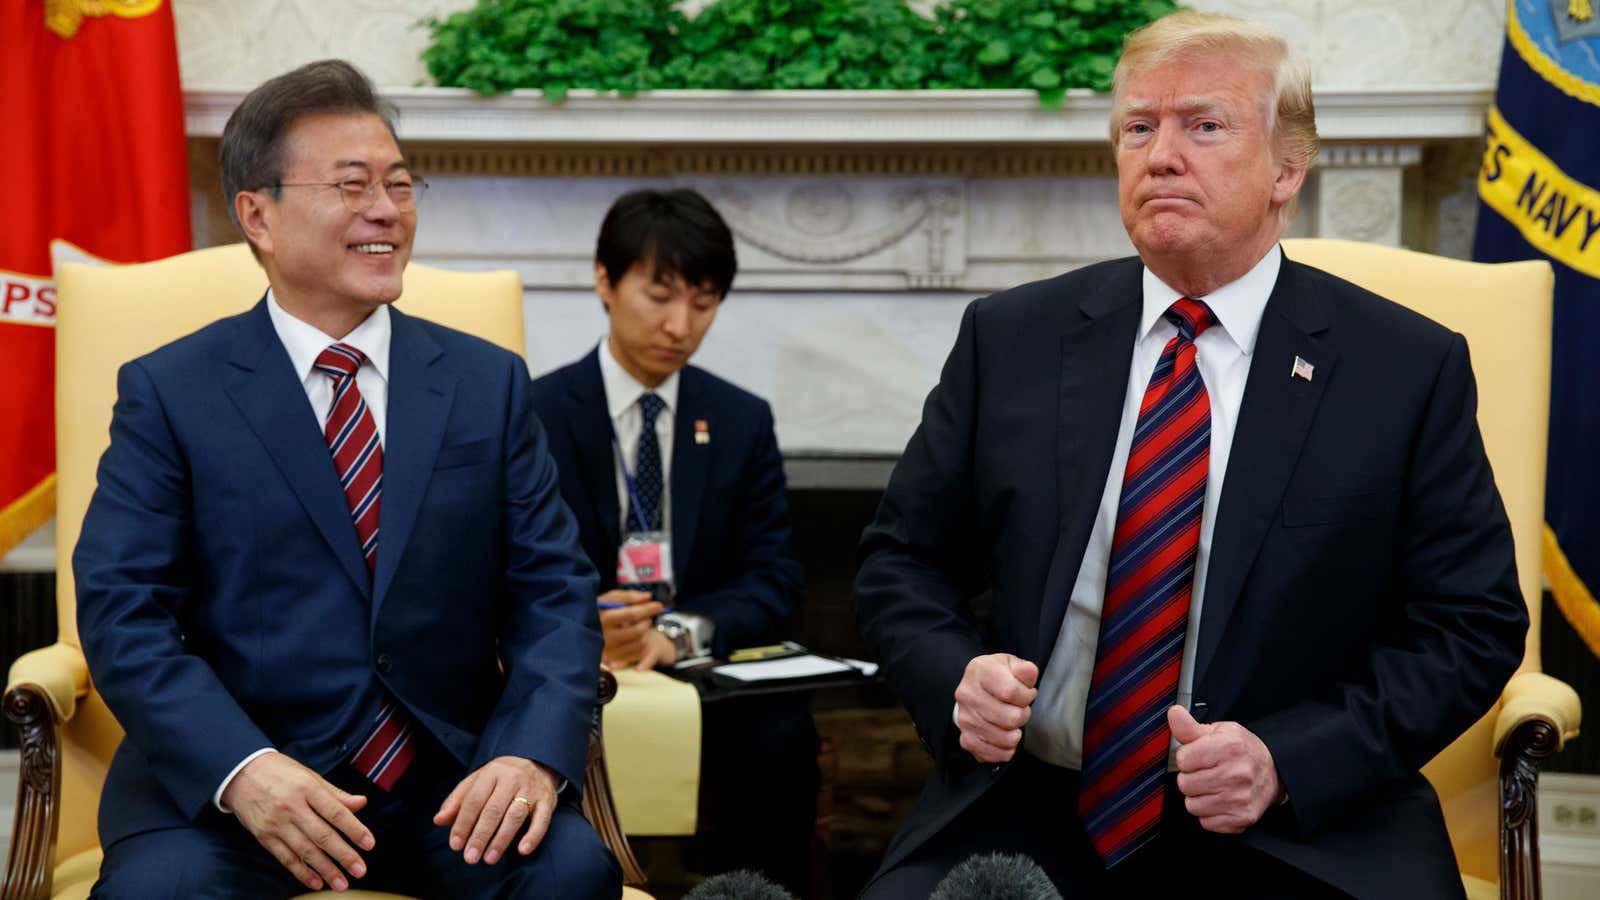 Trump met South Korea’s Moon Jae-in at the White House today.